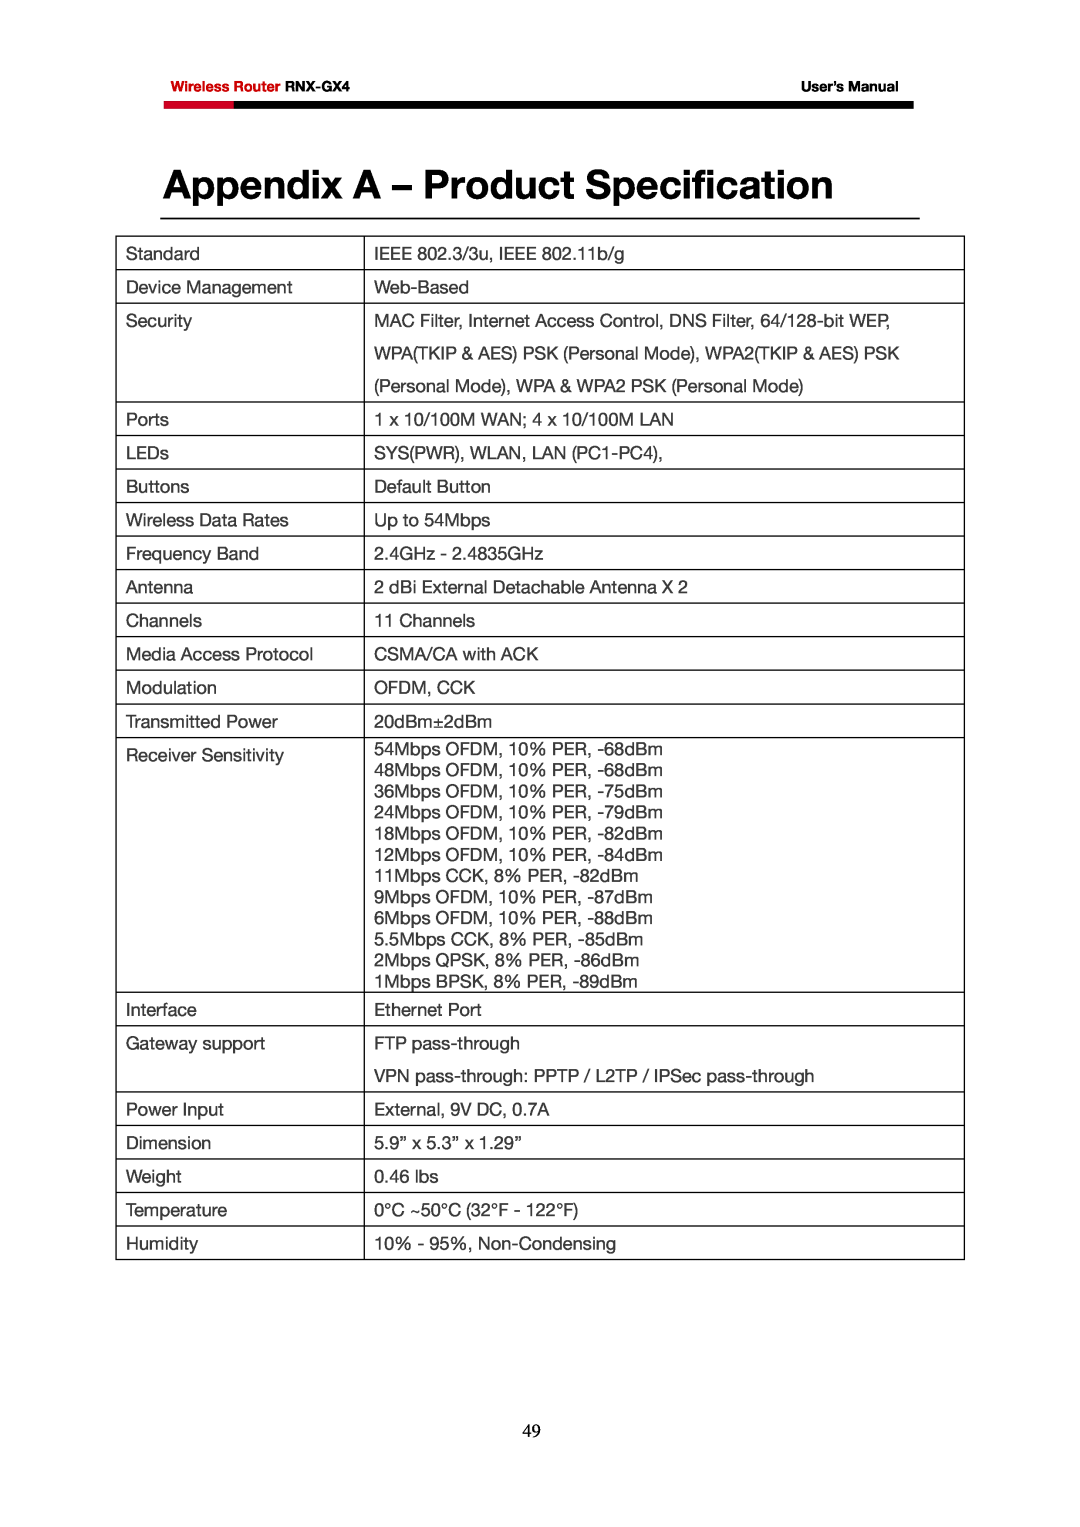 Rosewill RNX-GX4 user manual Appendix A - Product Specification 